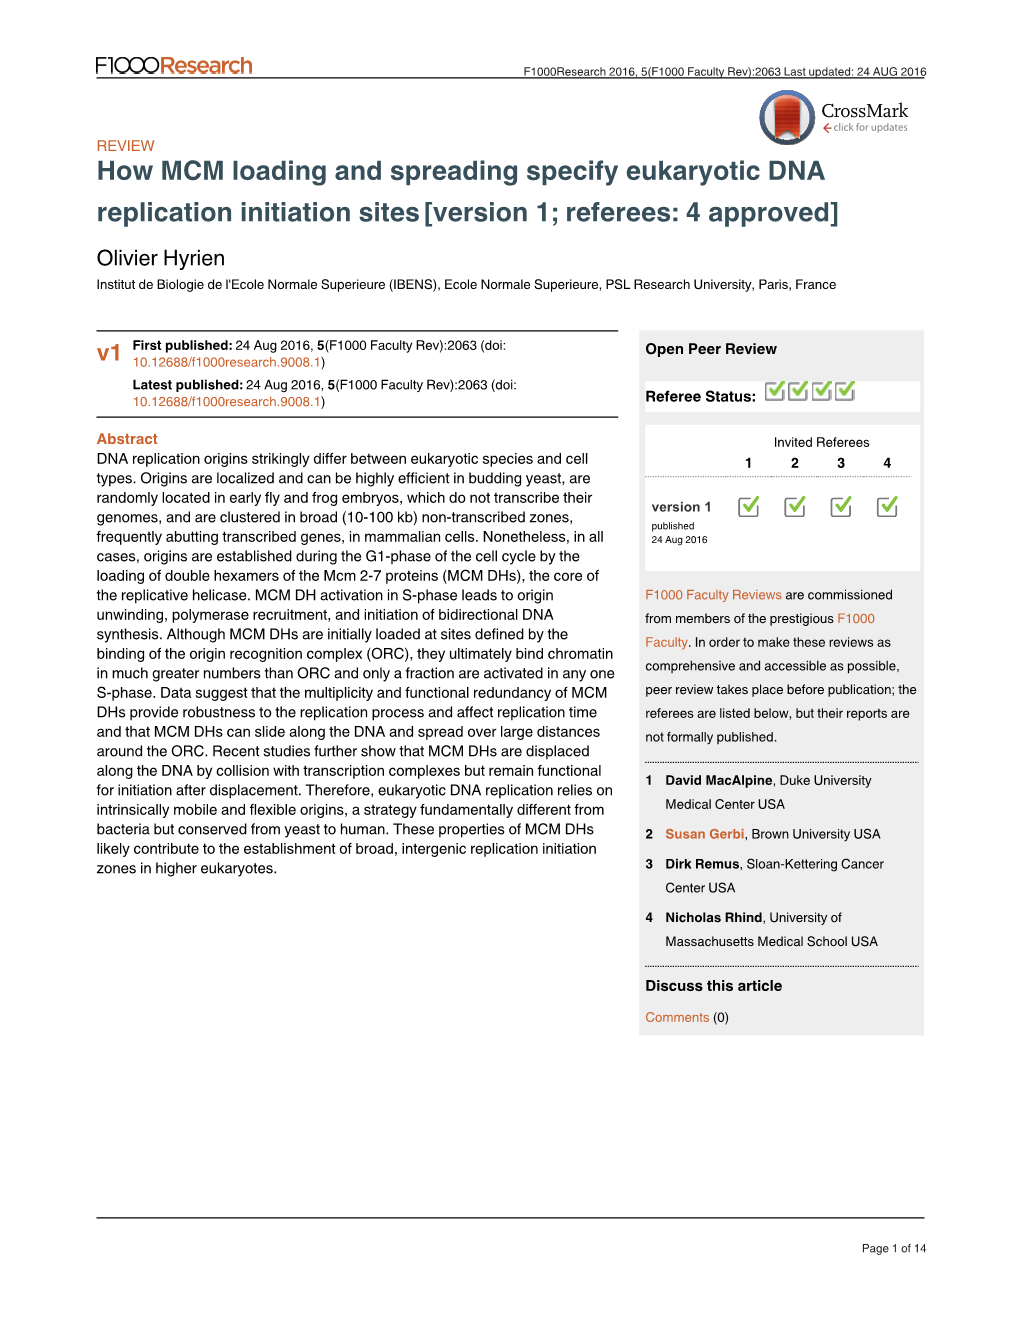 How MCM Loading and Spreading Specify Eukaryotic DNA Replication